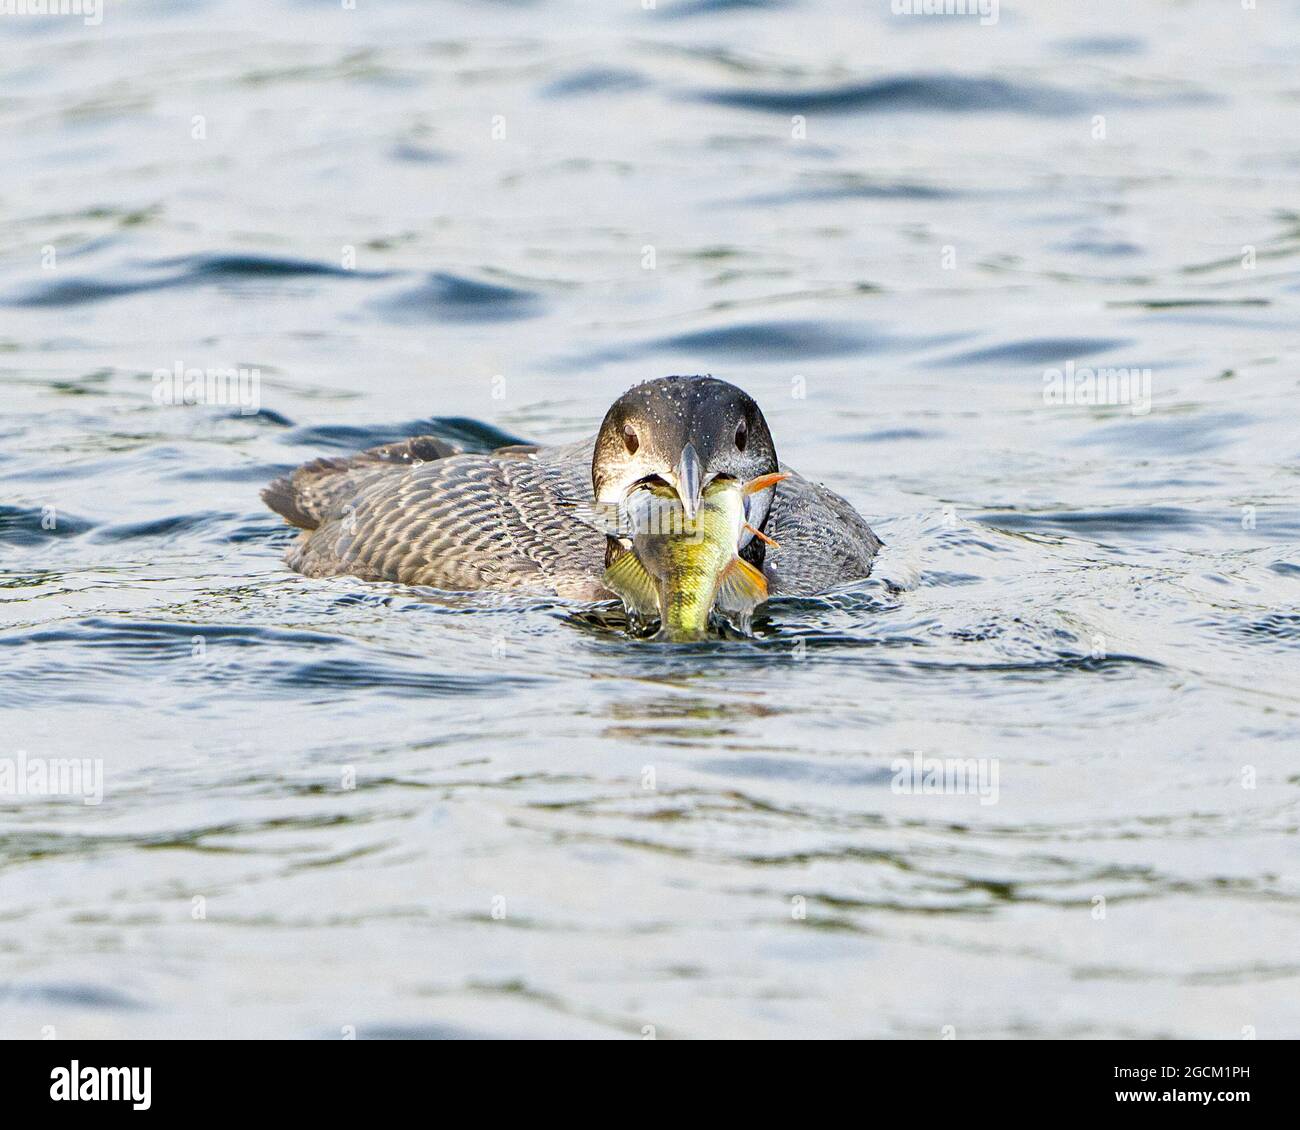 Common Juvenile Loon swimming with a perch fish in its beak in its environment and habitat surrounding,displaying its growing up stage feather plumage Stock Photo